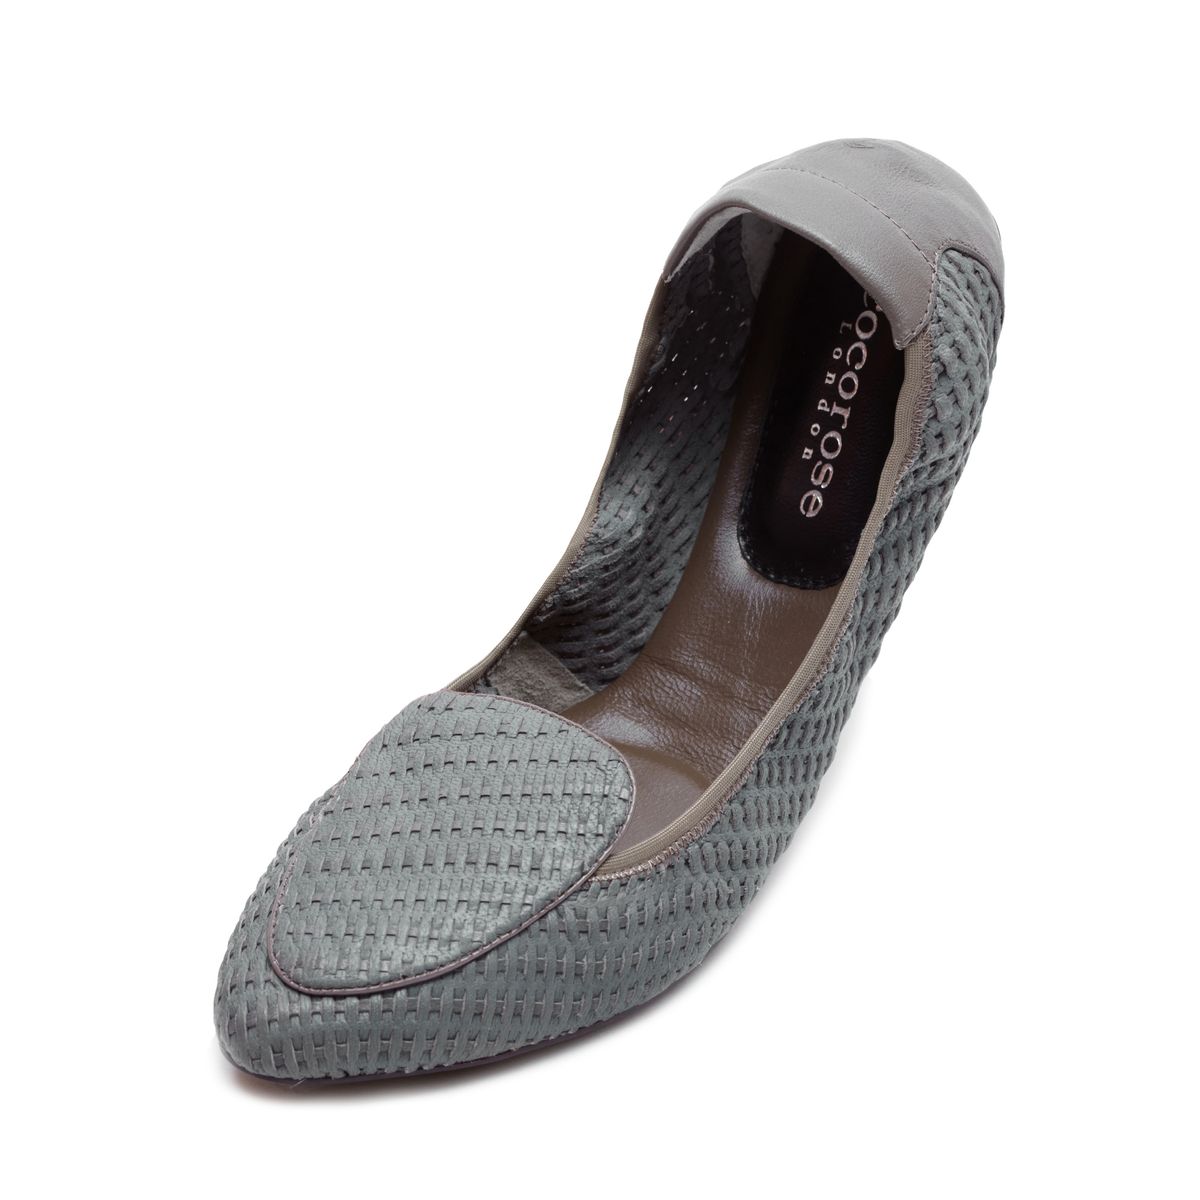 Grey woven leather loafer from Cocorose London